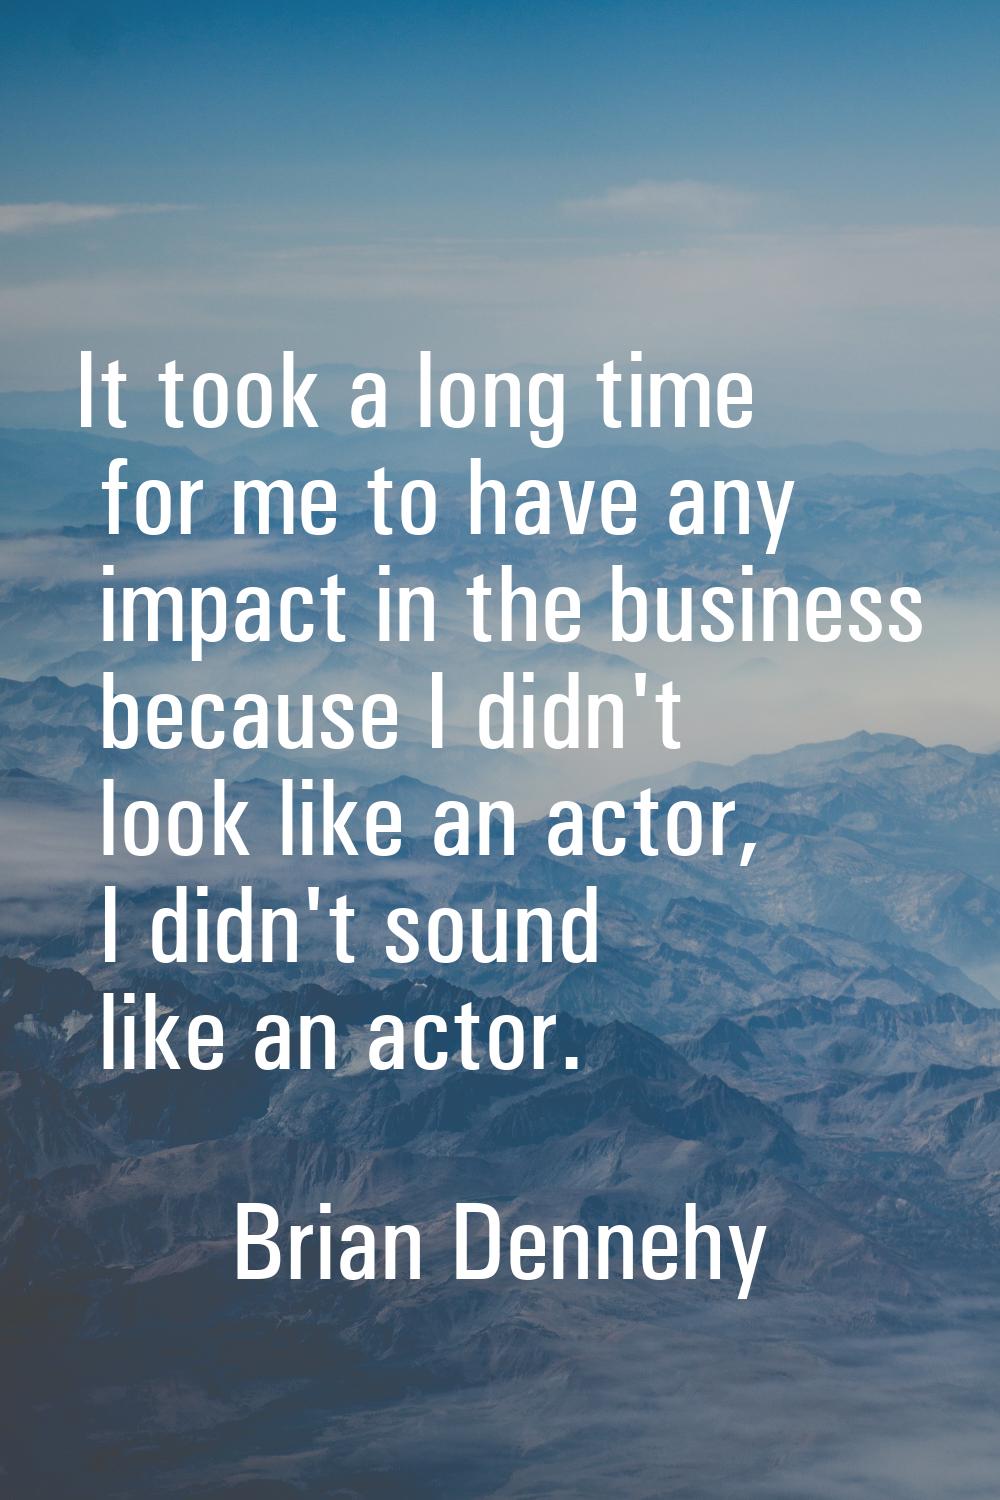 It took a long time for me to have any impact in the business because I didn't look like an actor, 